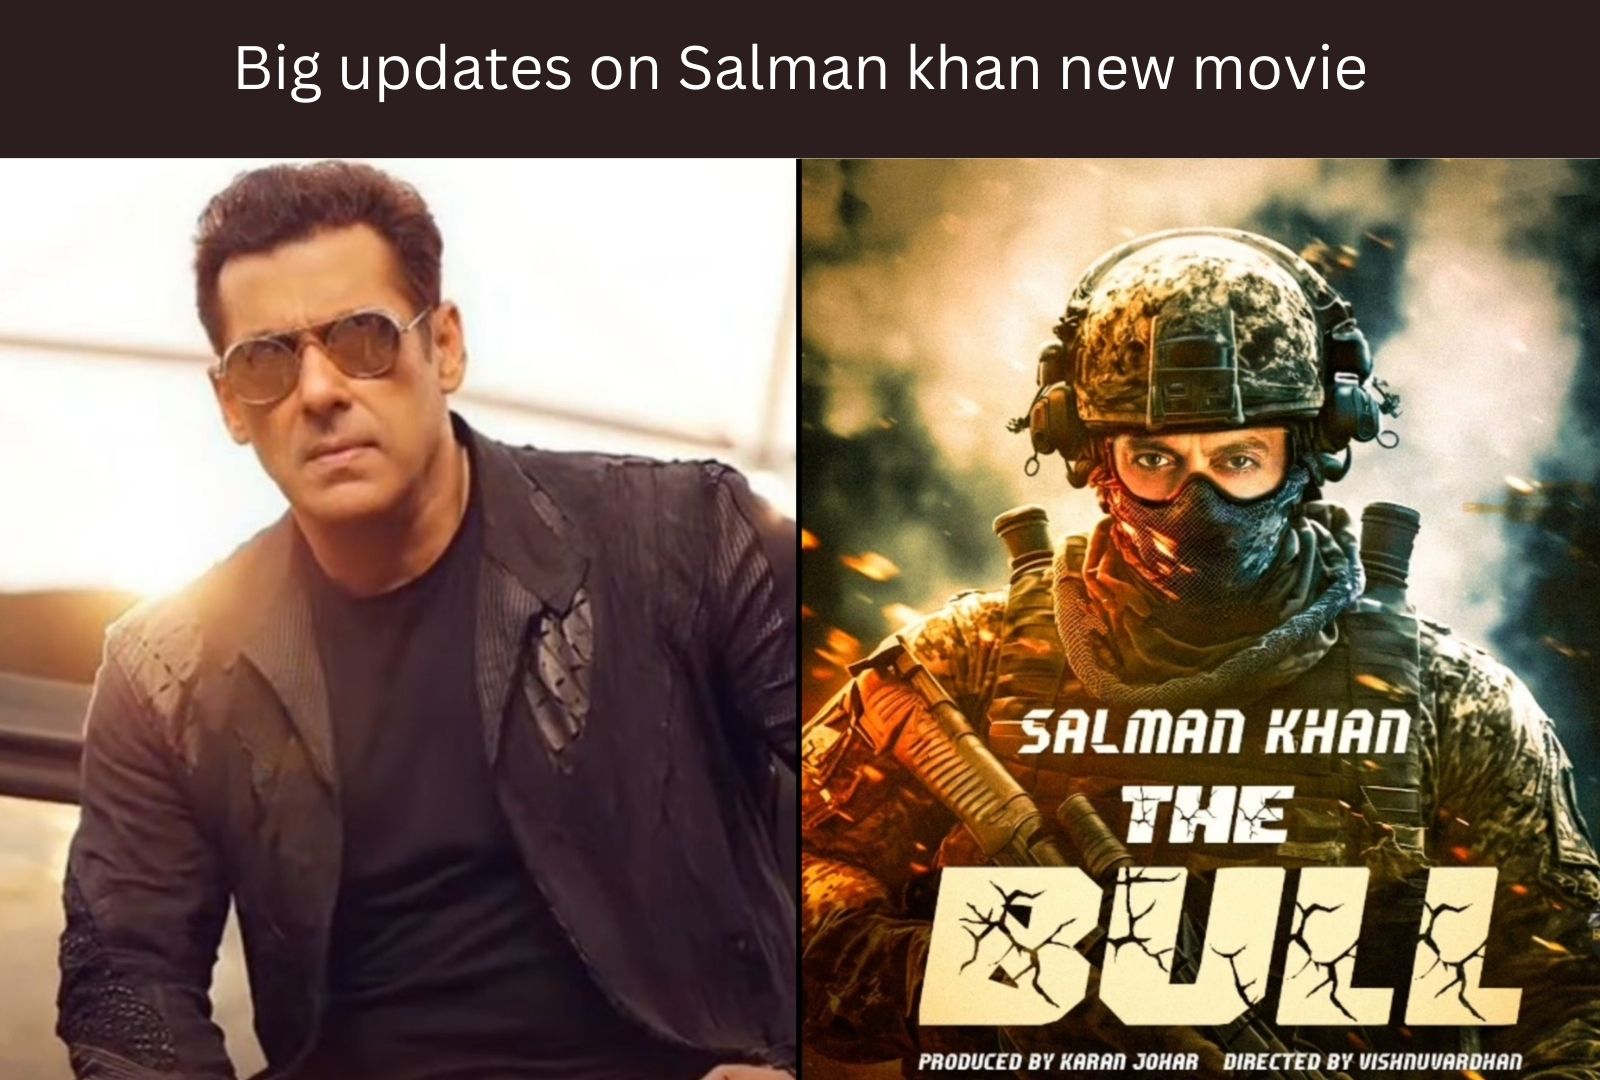 Big updates on Salman khan from the set of the Bull movie